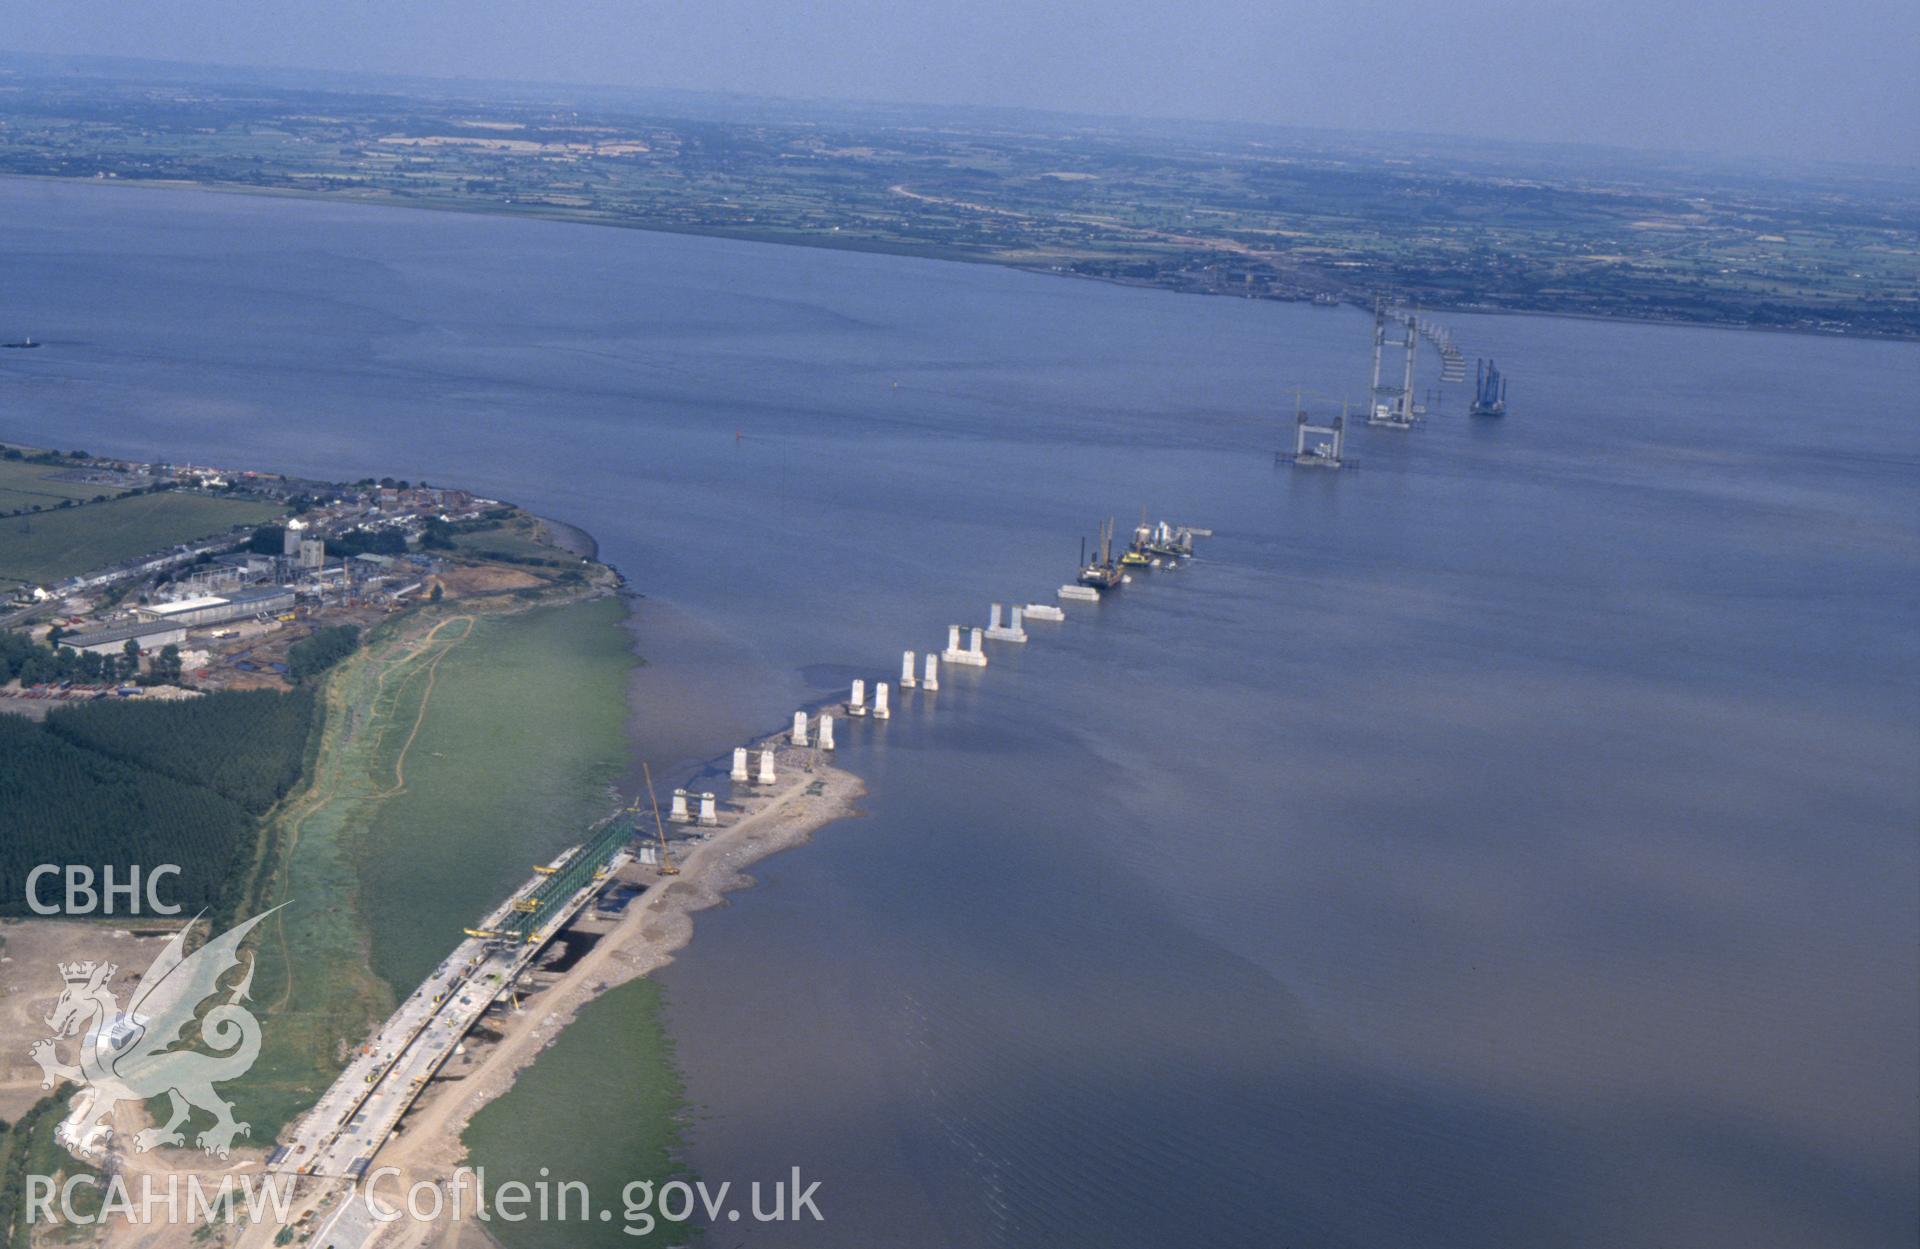 RCAHMW colour slide oblique aerial photograph of Second Severn Crossing under construction taken by C.R. Musson, 18/07/94